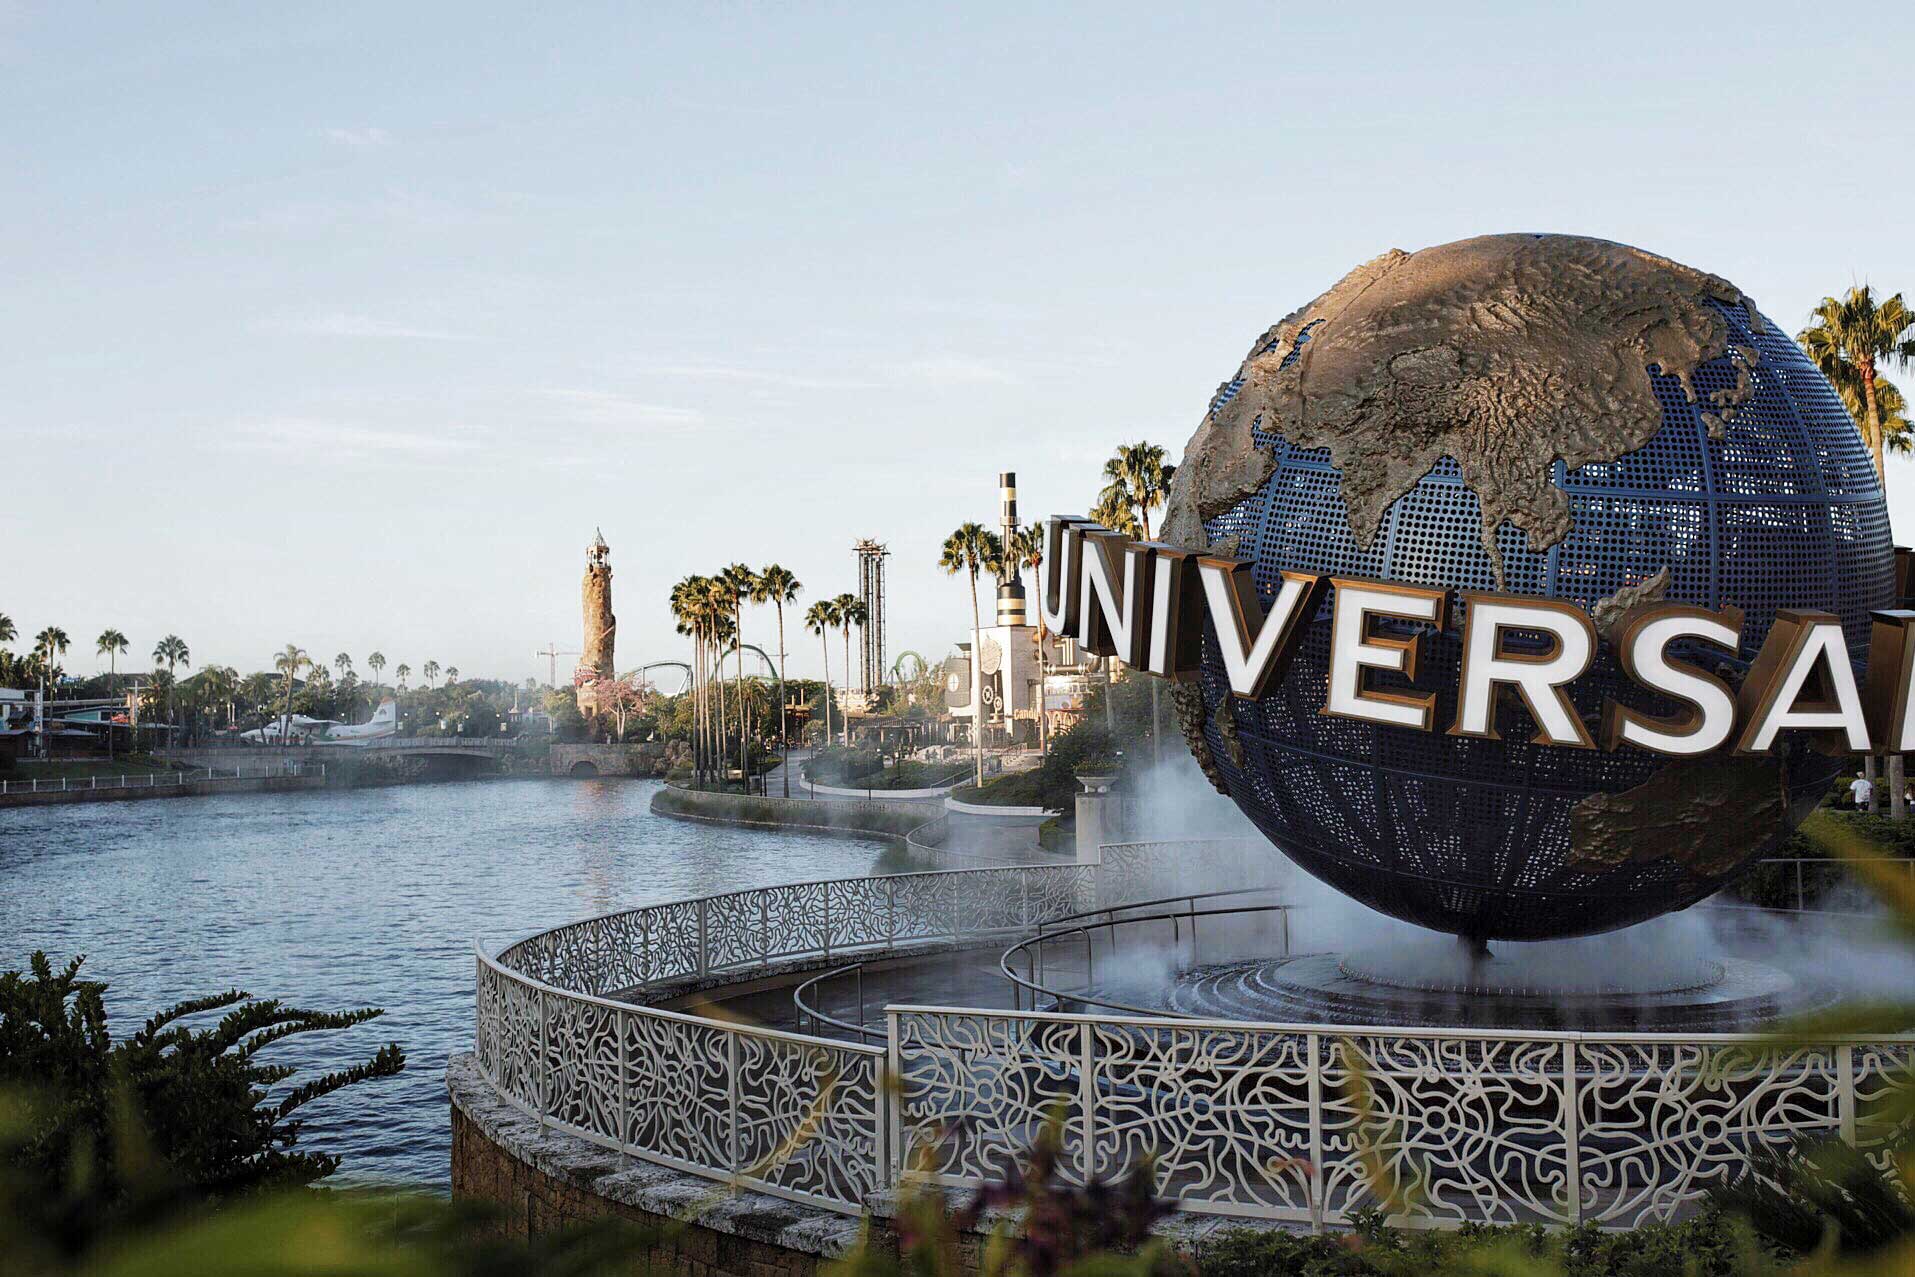 Universal Parks and Resorts